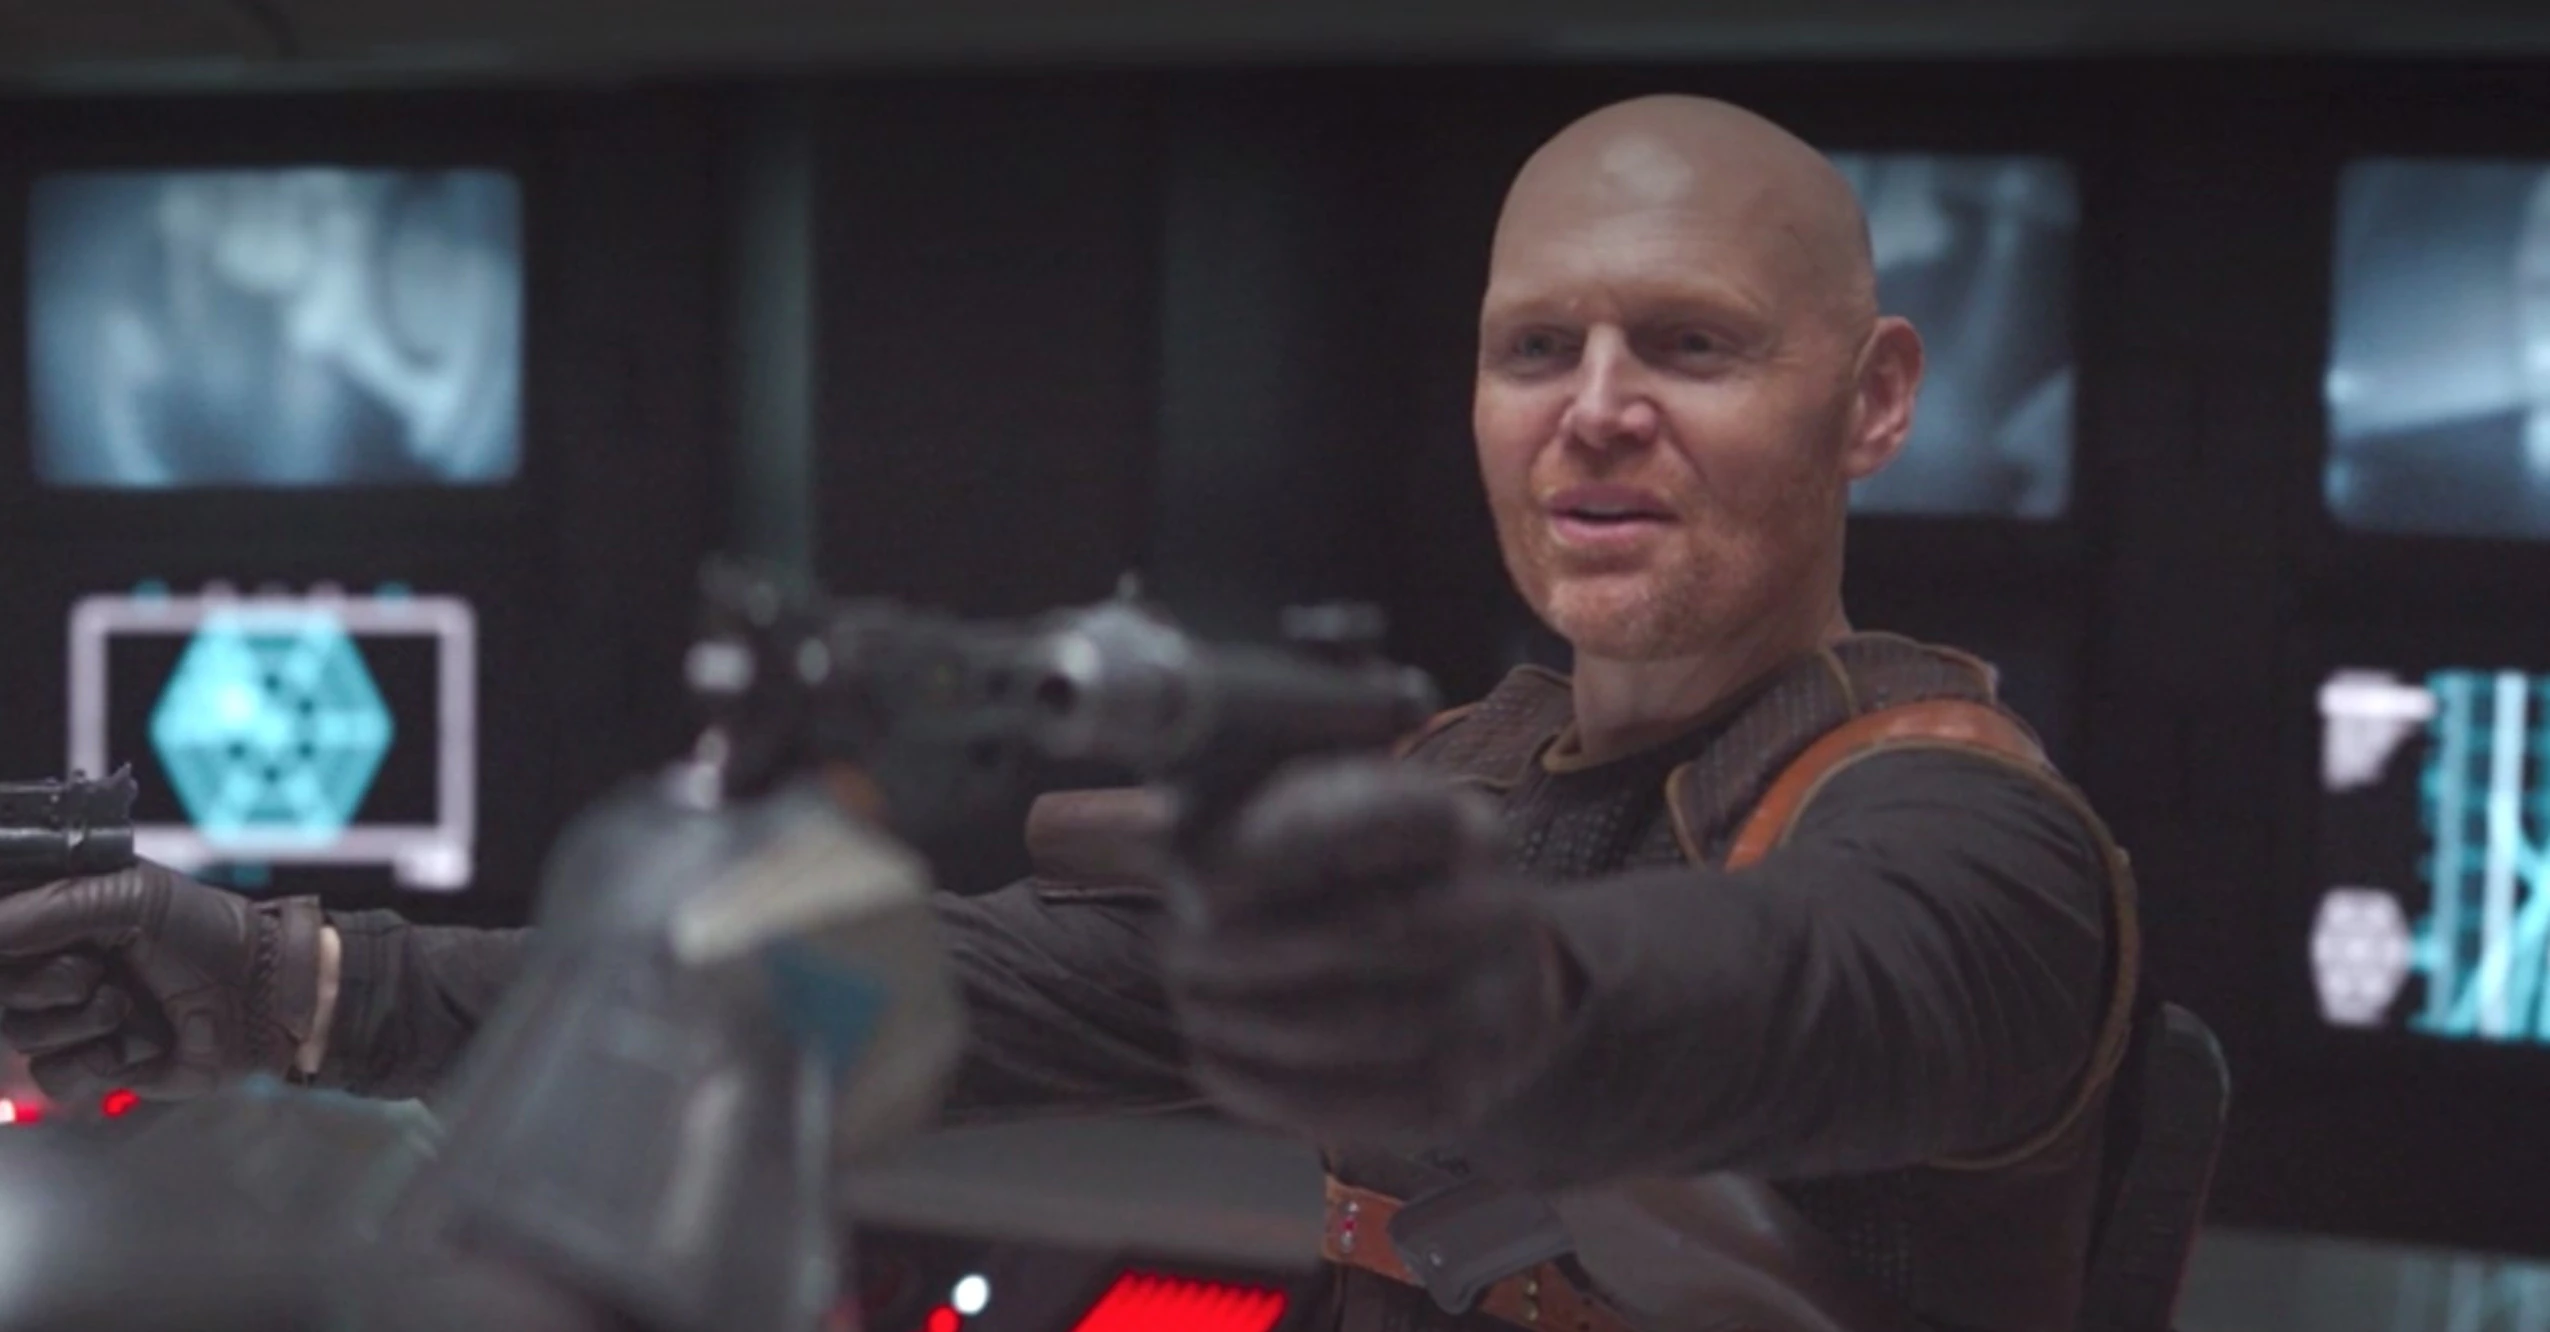 Bill Burr Explains The Difference Between ‘Creepy’ Star Wars Fans and Obnoxious Sports Fans